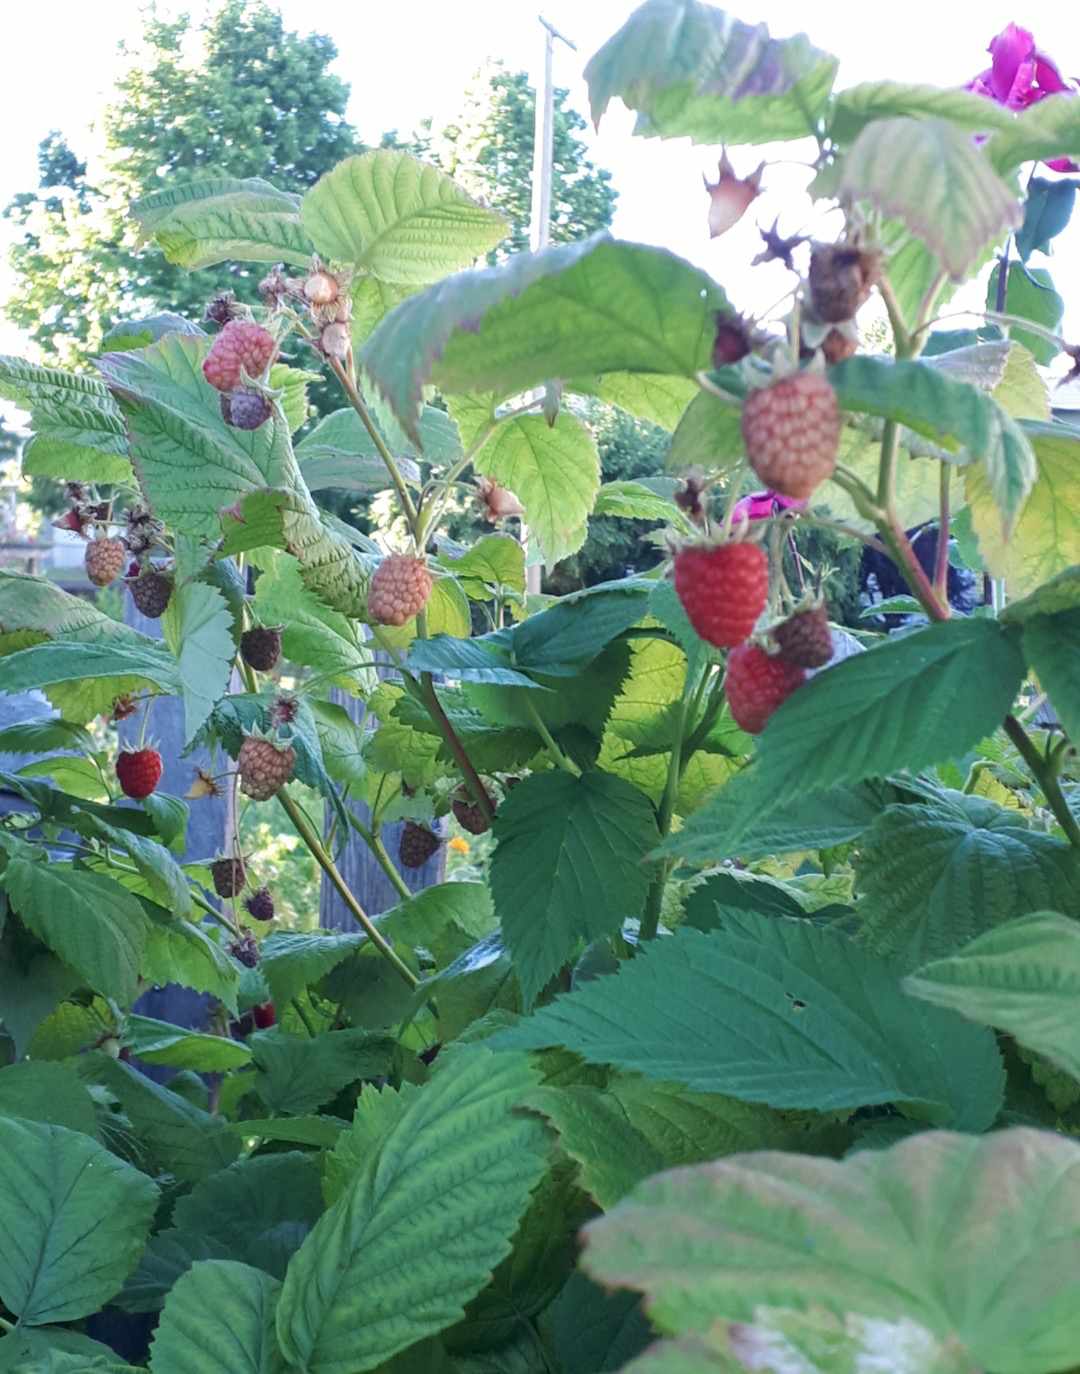 closeup of raspberry bushes with ripe and unripe berries